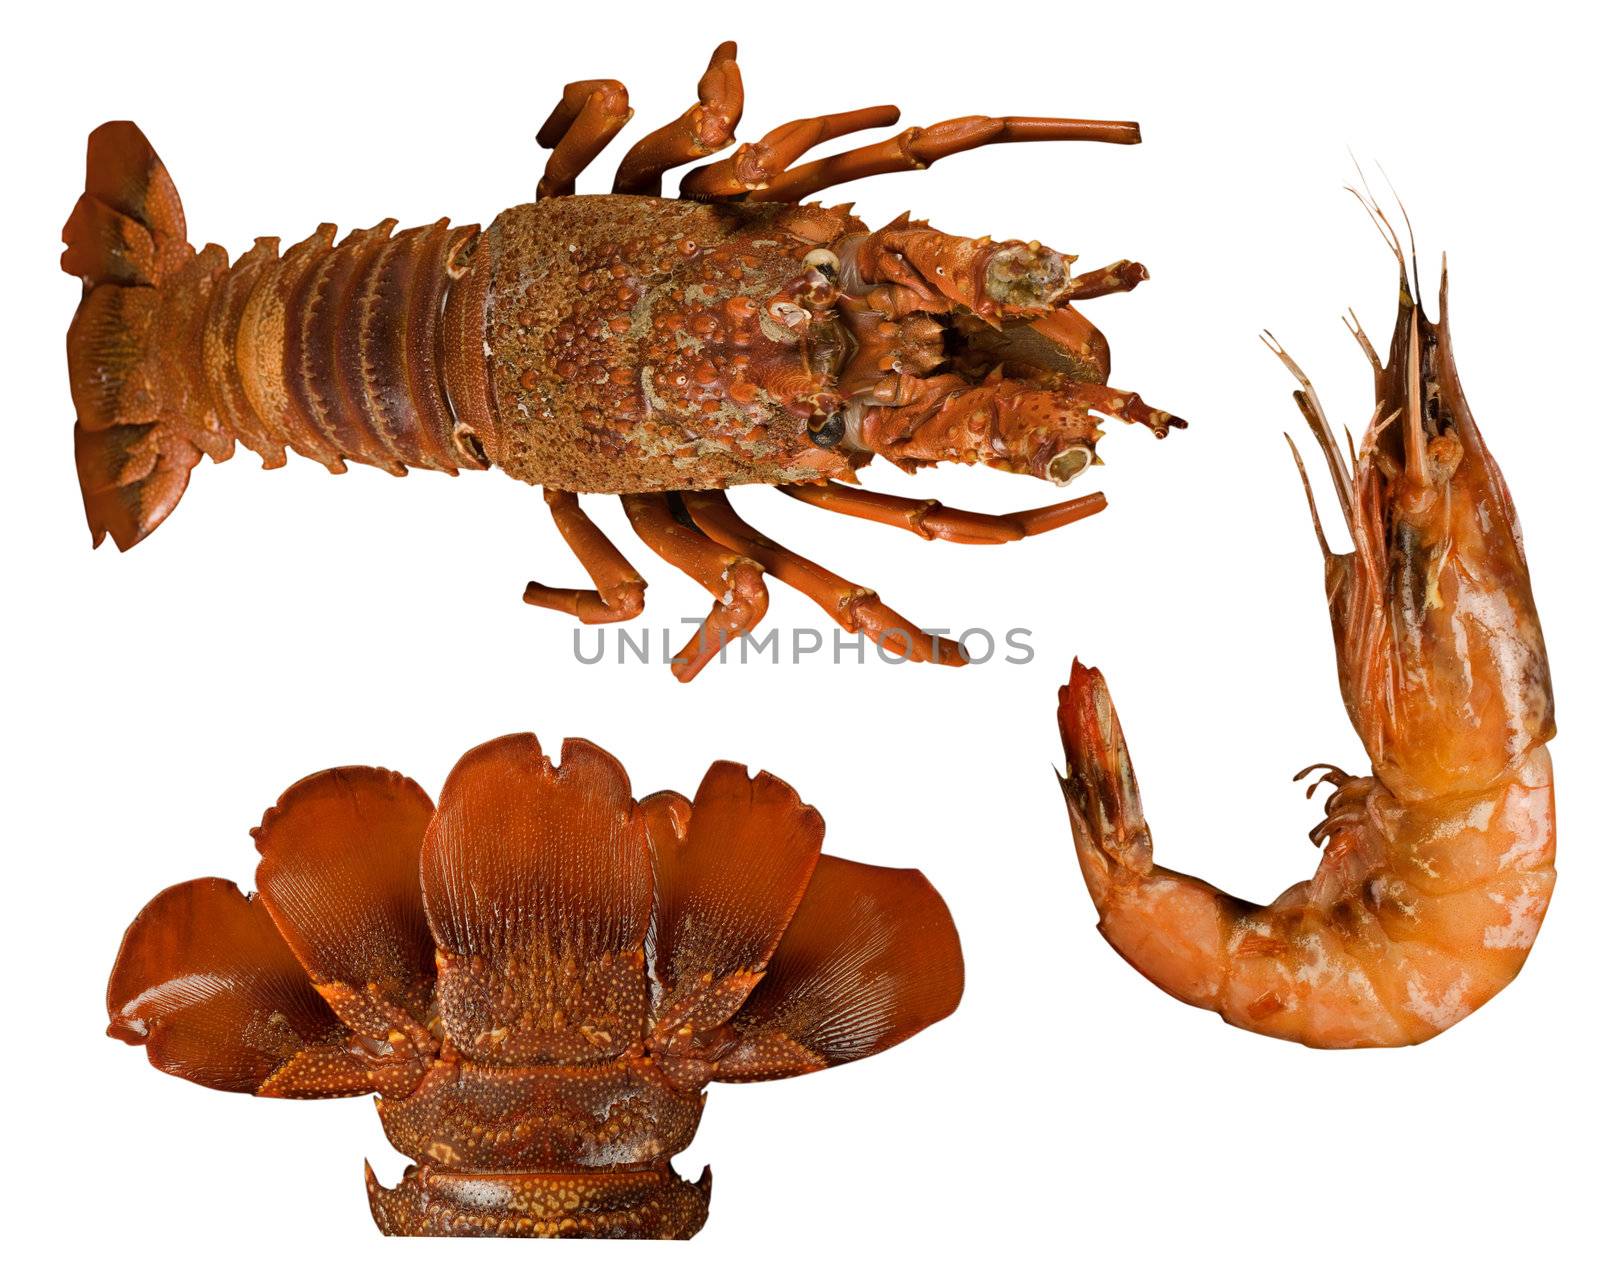 Crayfish or lobster tail on wooden table